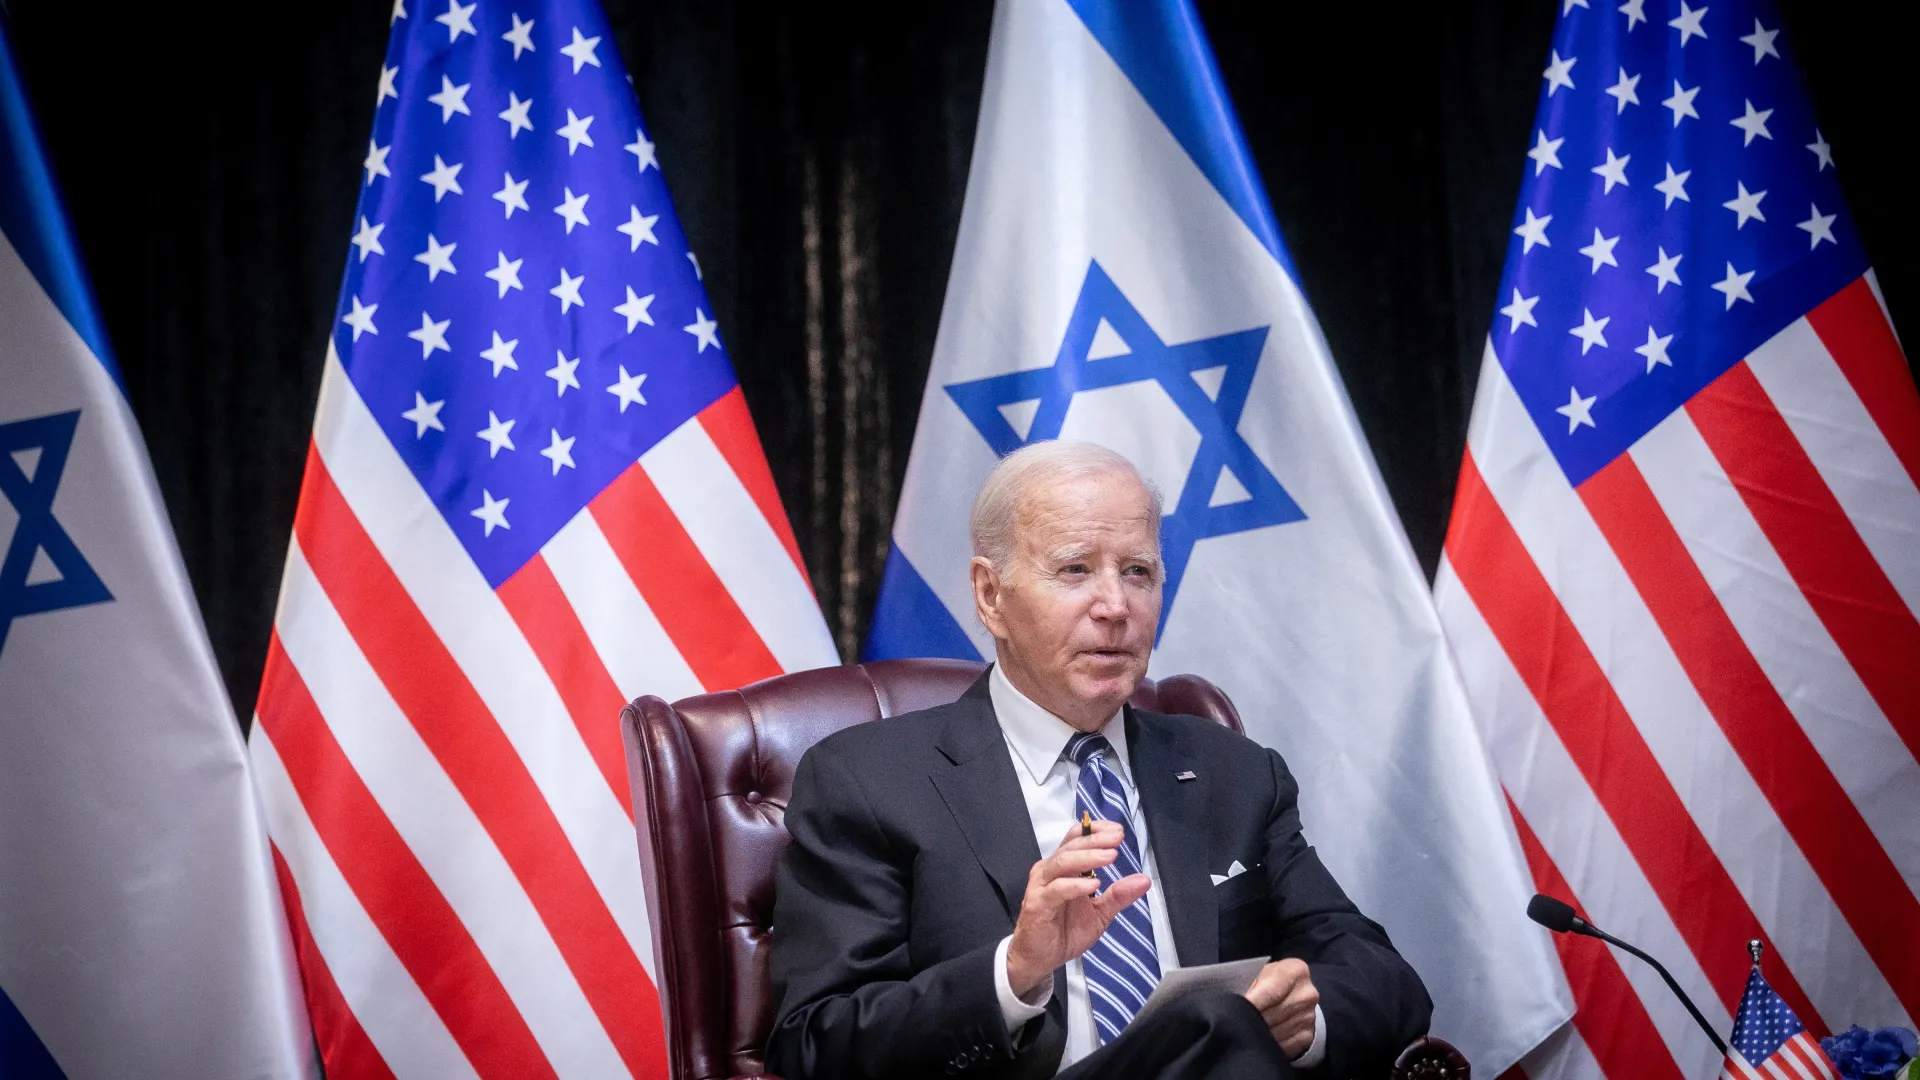 Biden's stance on Israel becomes a divisive issue within Democratic ranks (Credits: Al Jazeera)